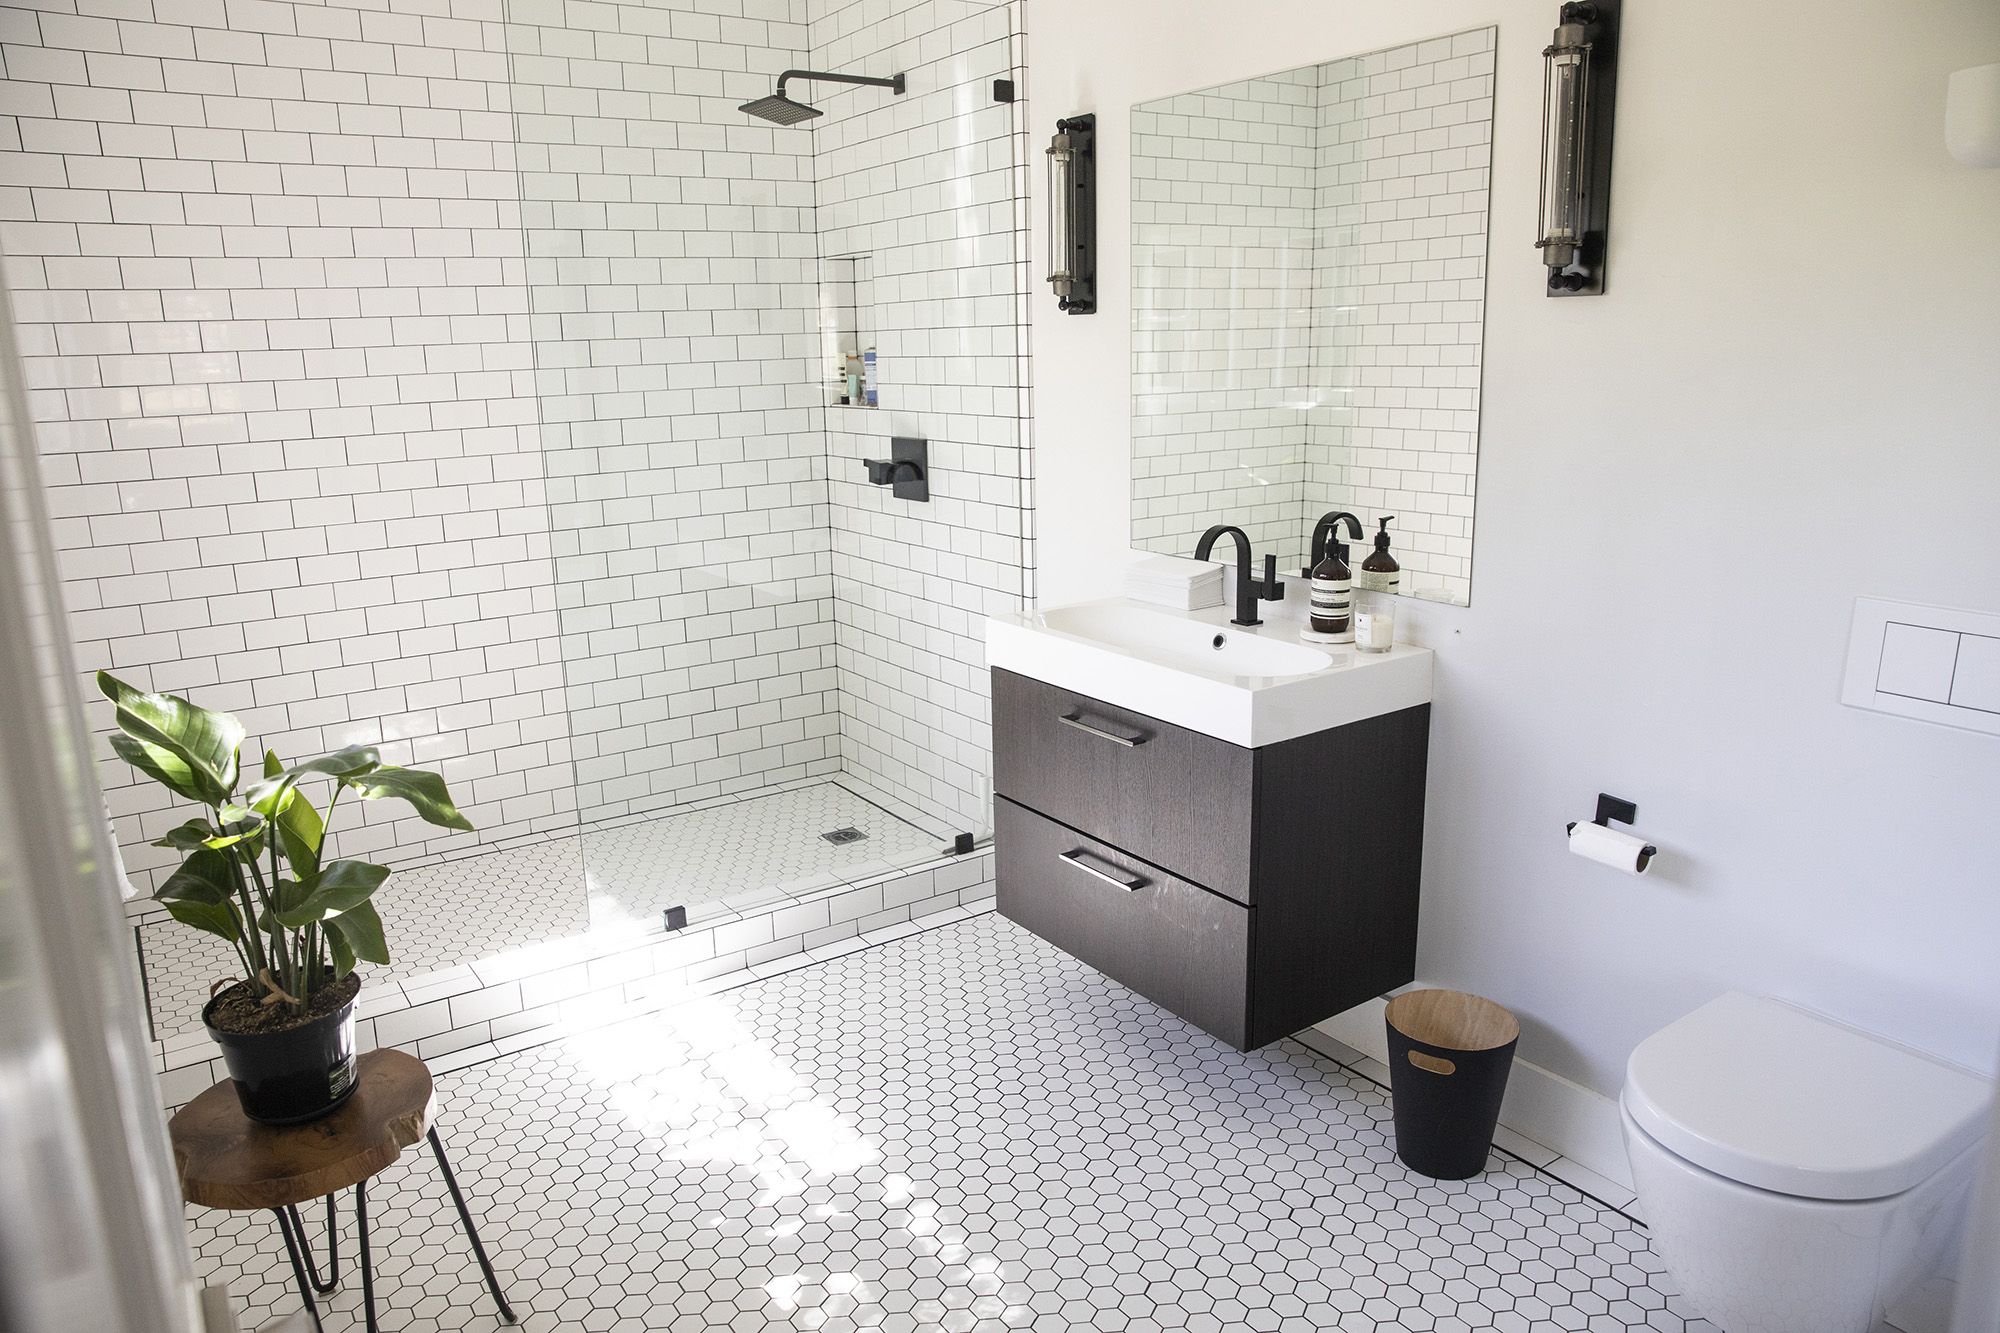 23 Bathroom Mirror Ideas That Will Dress Up Your Space